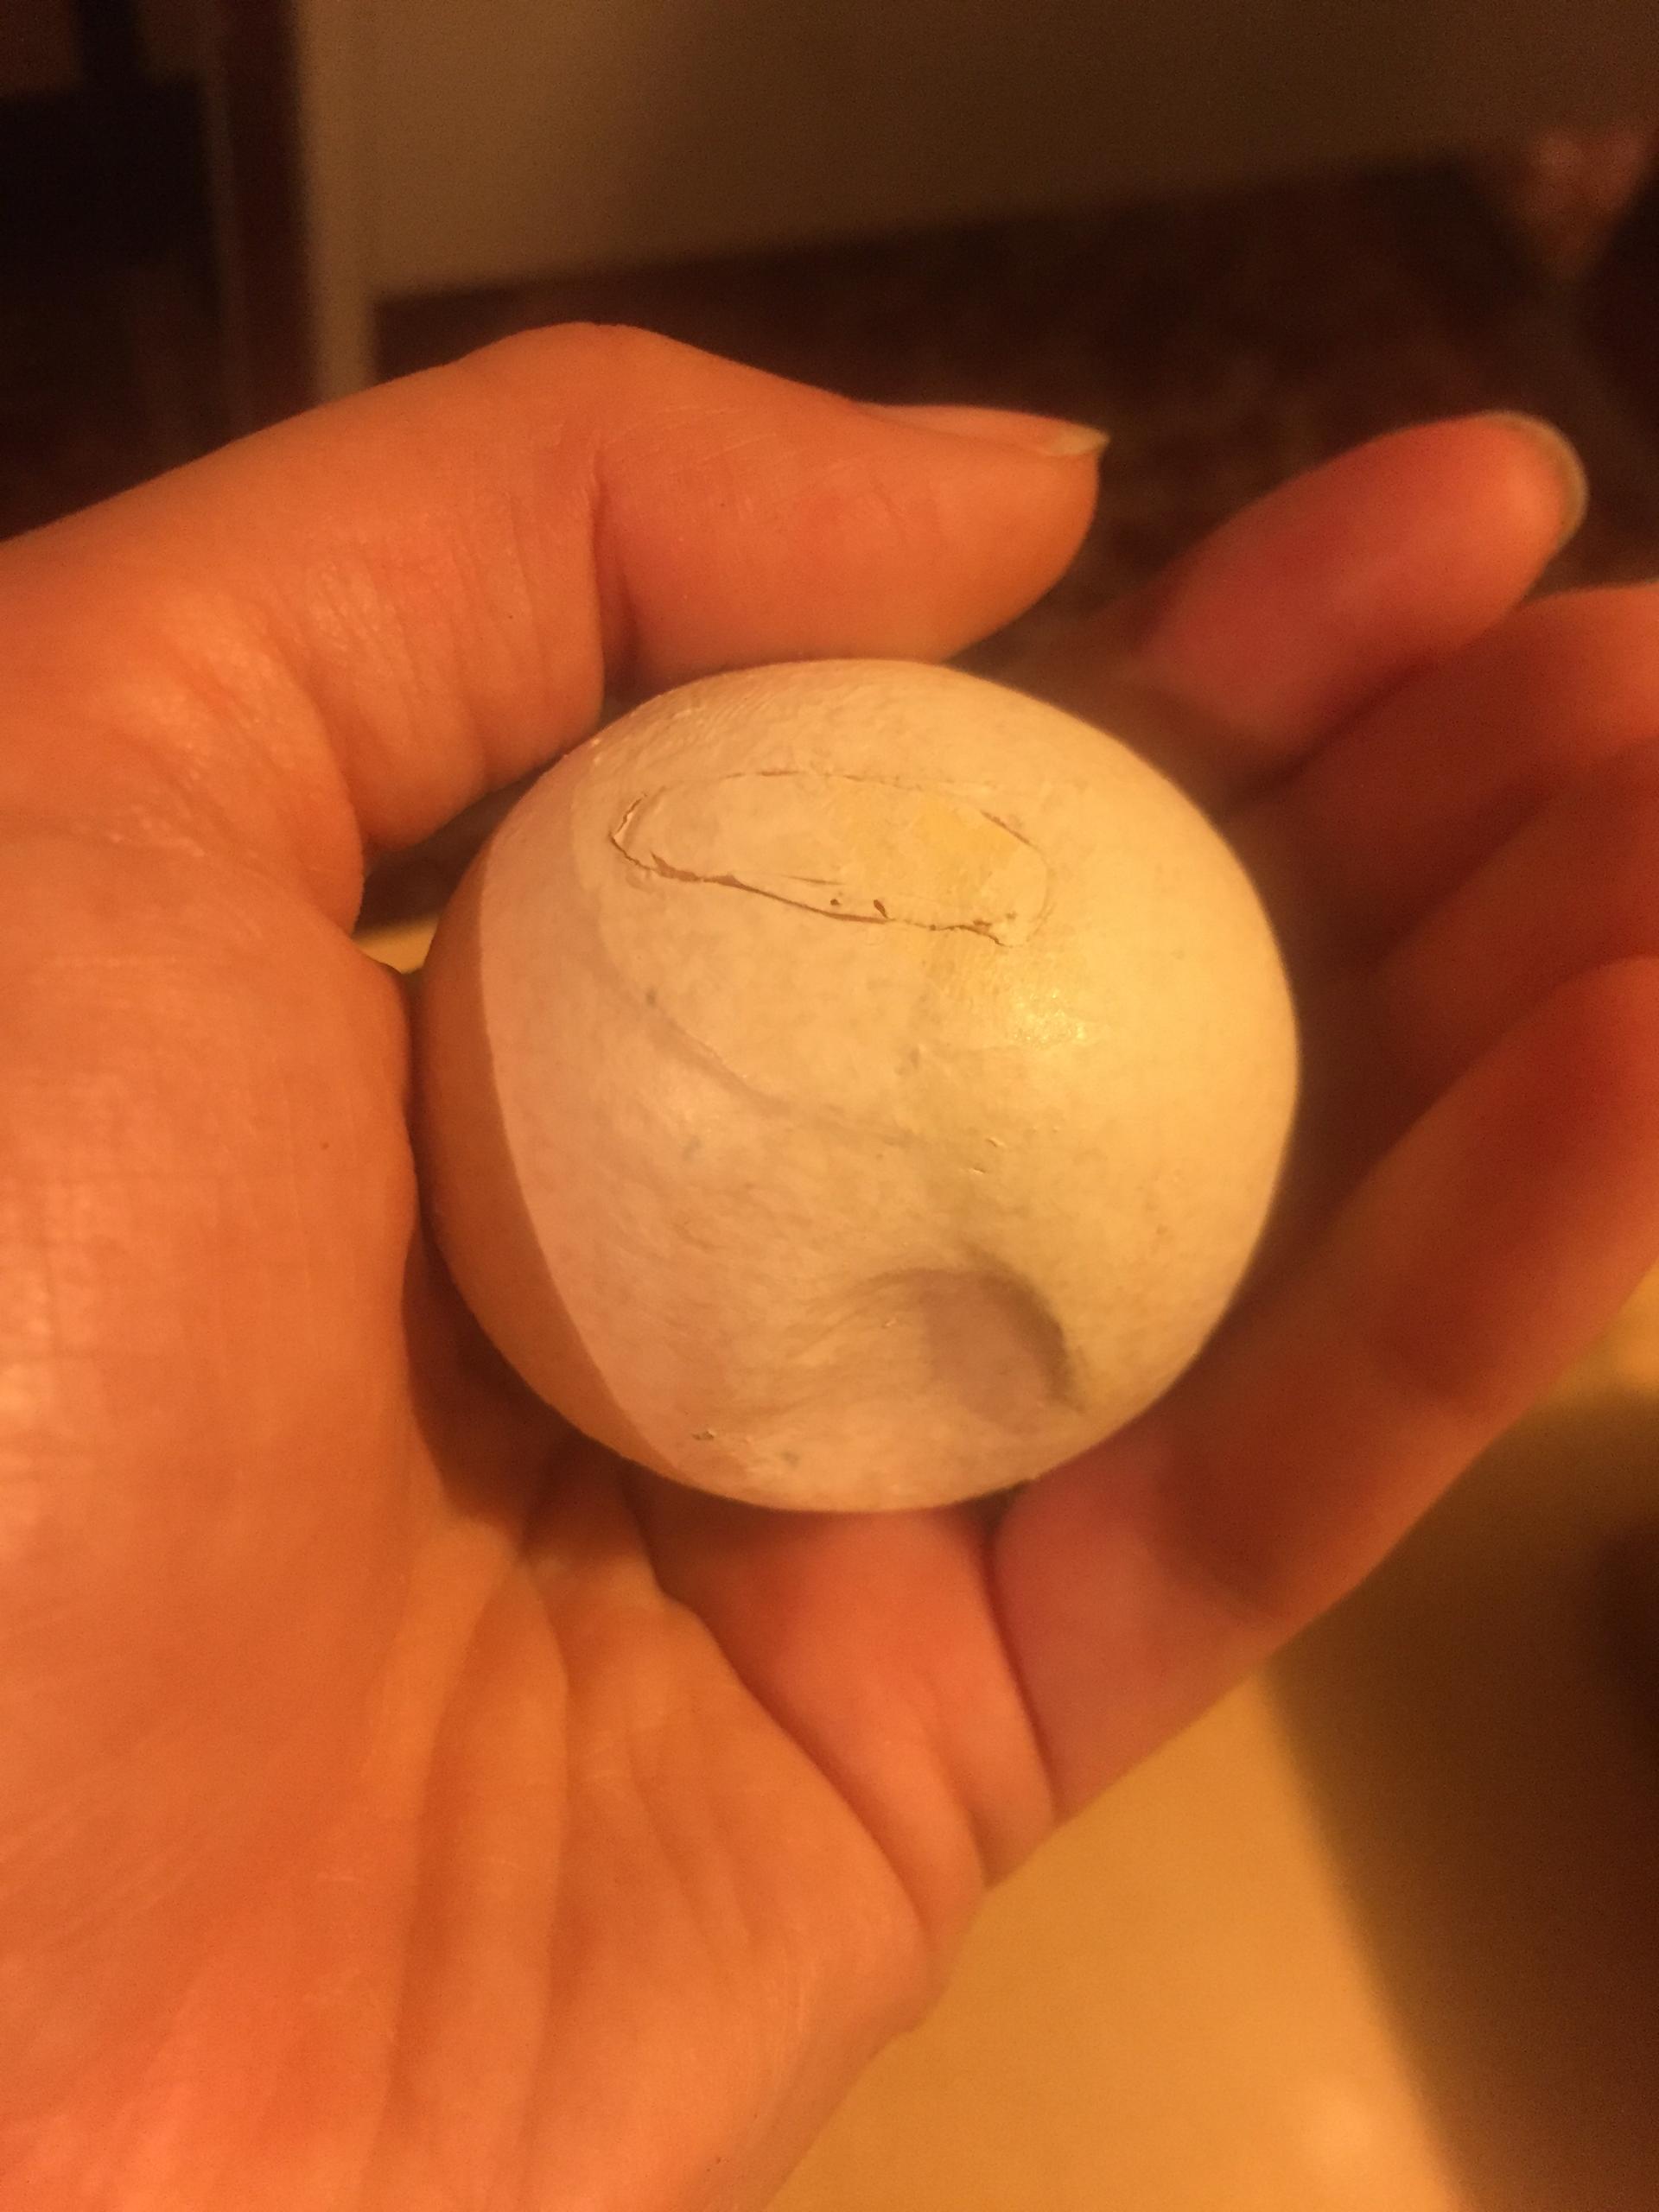 The fake egg, once it's finished, looks like a ping pong ball with a dimple in it.